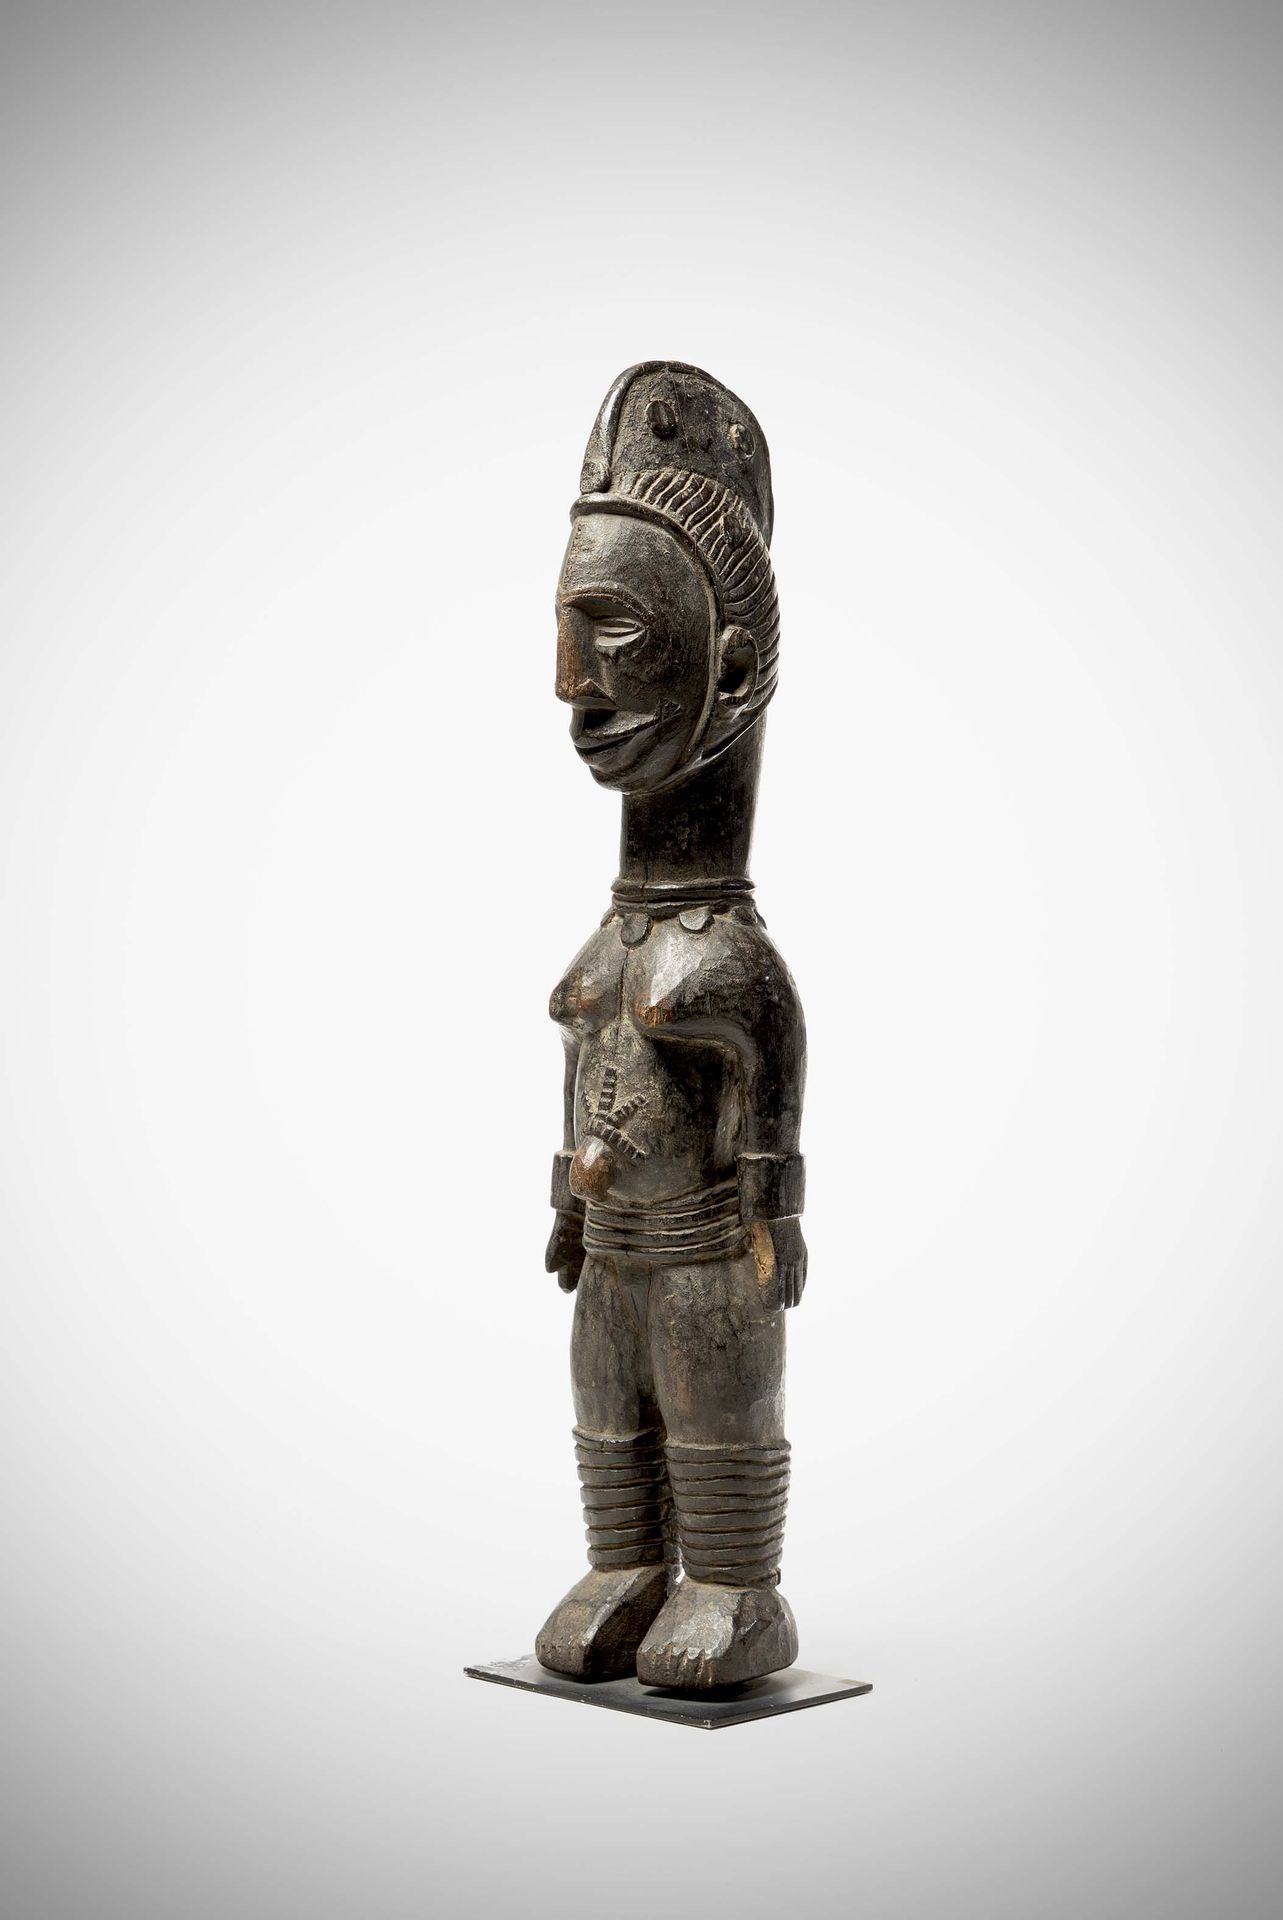 Null Ibo

( Nigeria ) Large wooden doll with black lacquered patina, representin&hellip;